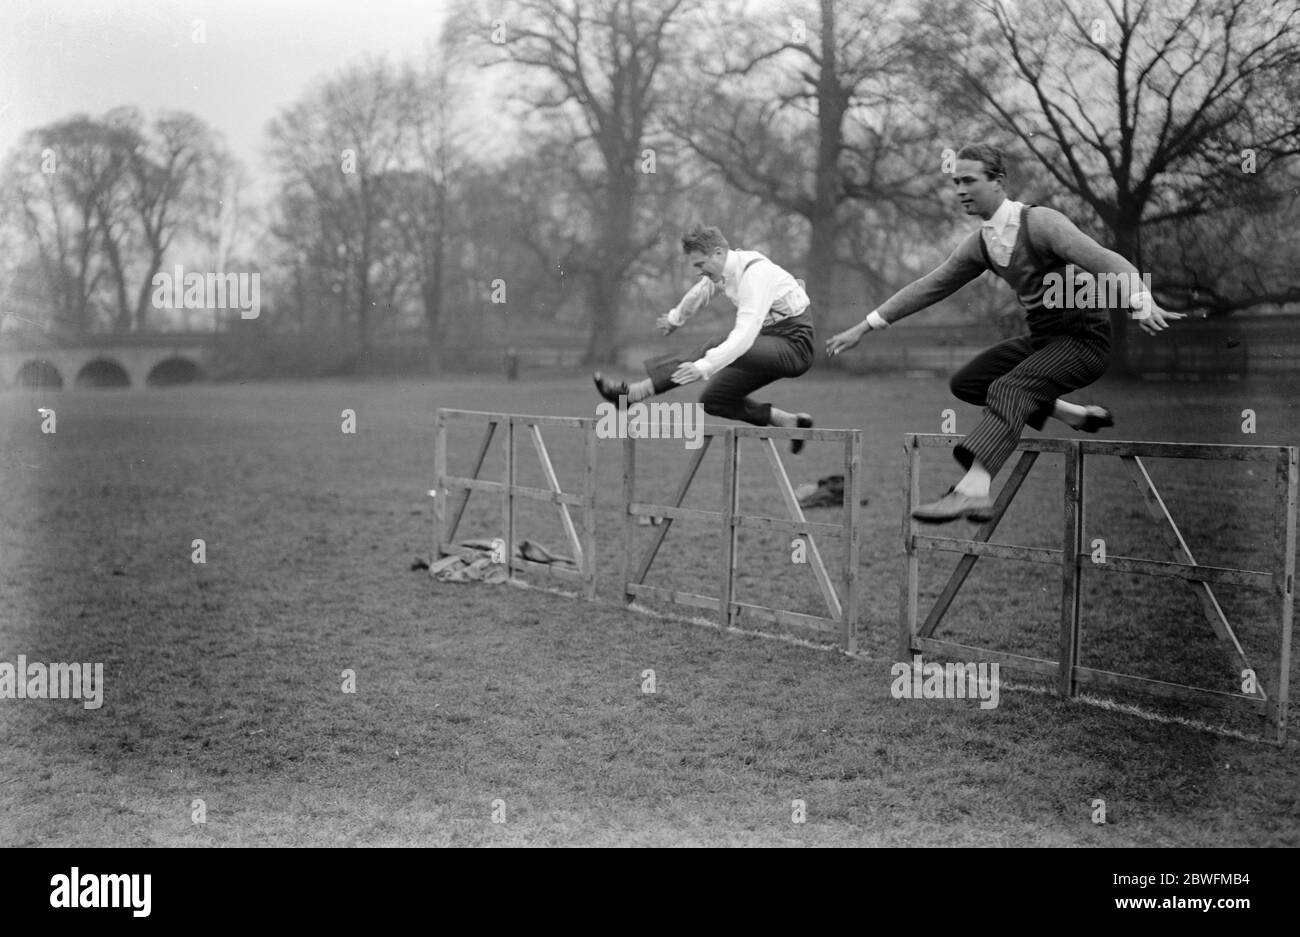 Eton College sports . The Earl of Kincardine ( white shirt ) going over the top against R B Turner in the hurdles at Eton College sports . 16 March 1925 Stock Photo